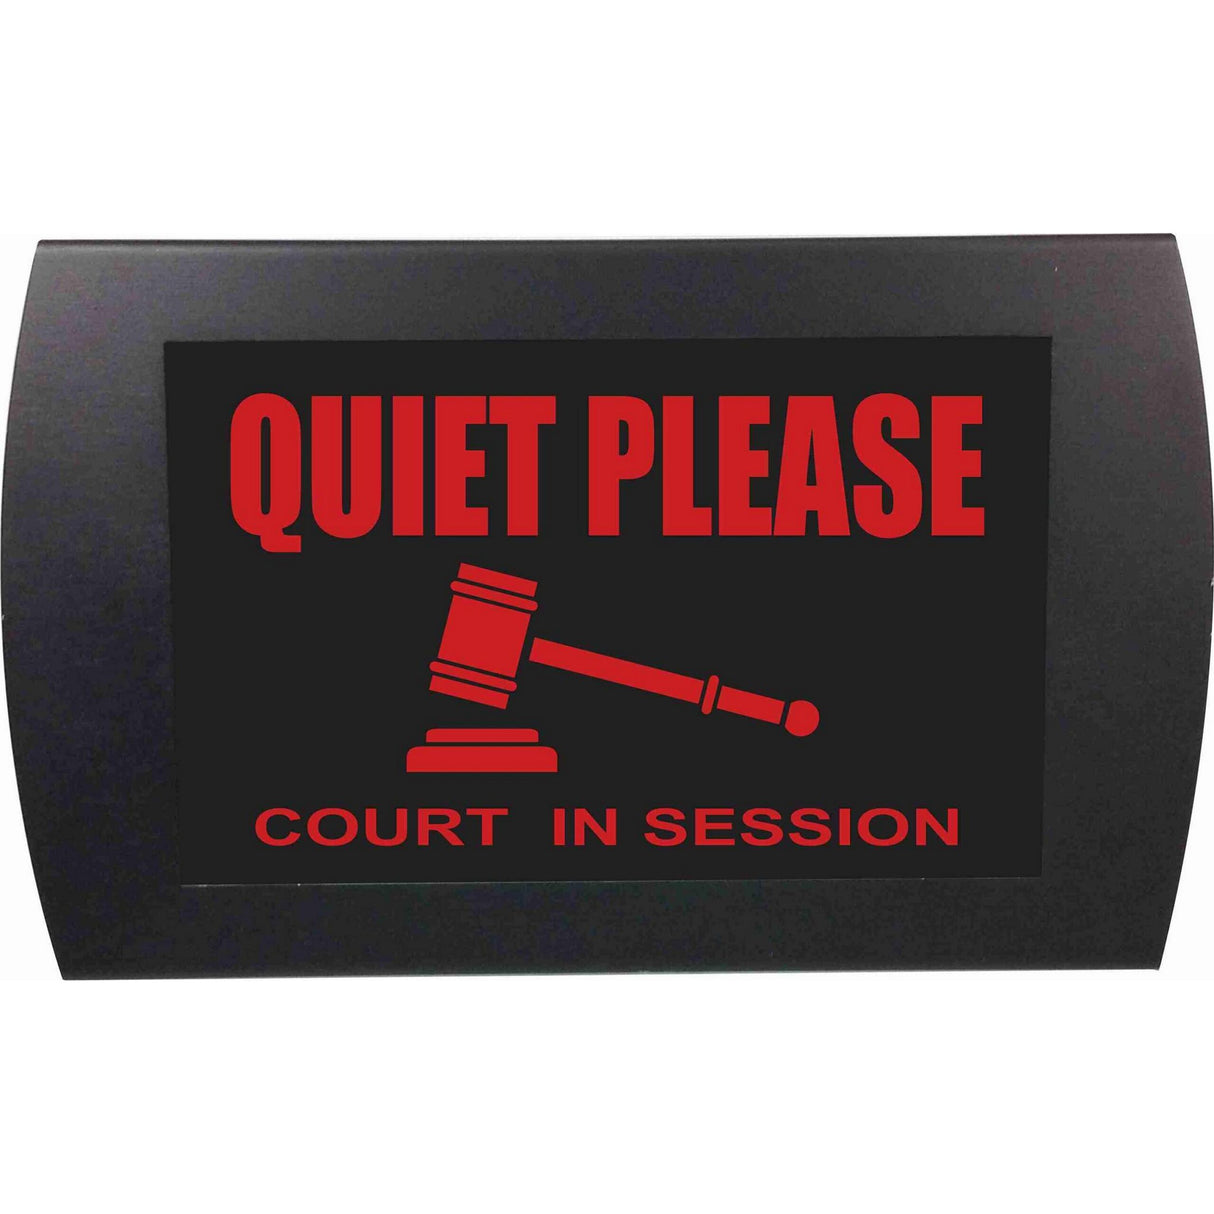 American Recorder OAS-2009M-RD "QUIET PLEASE - COURT IN SESSION" LED Lighted Sign, Red